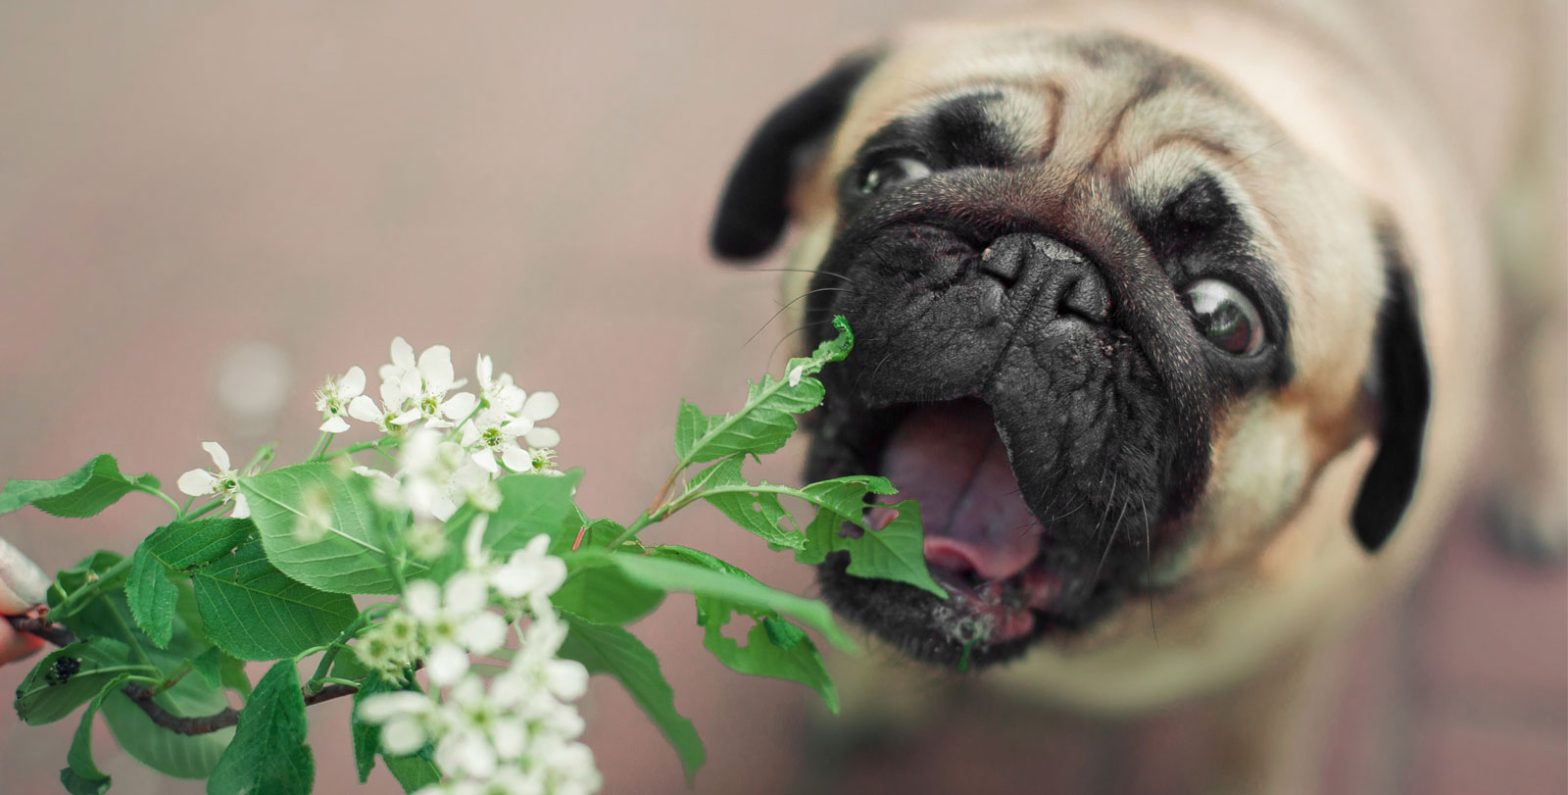 keeping-our-furry-friends-safe-8-poisonous-household-plants-to-look-out-for-banner